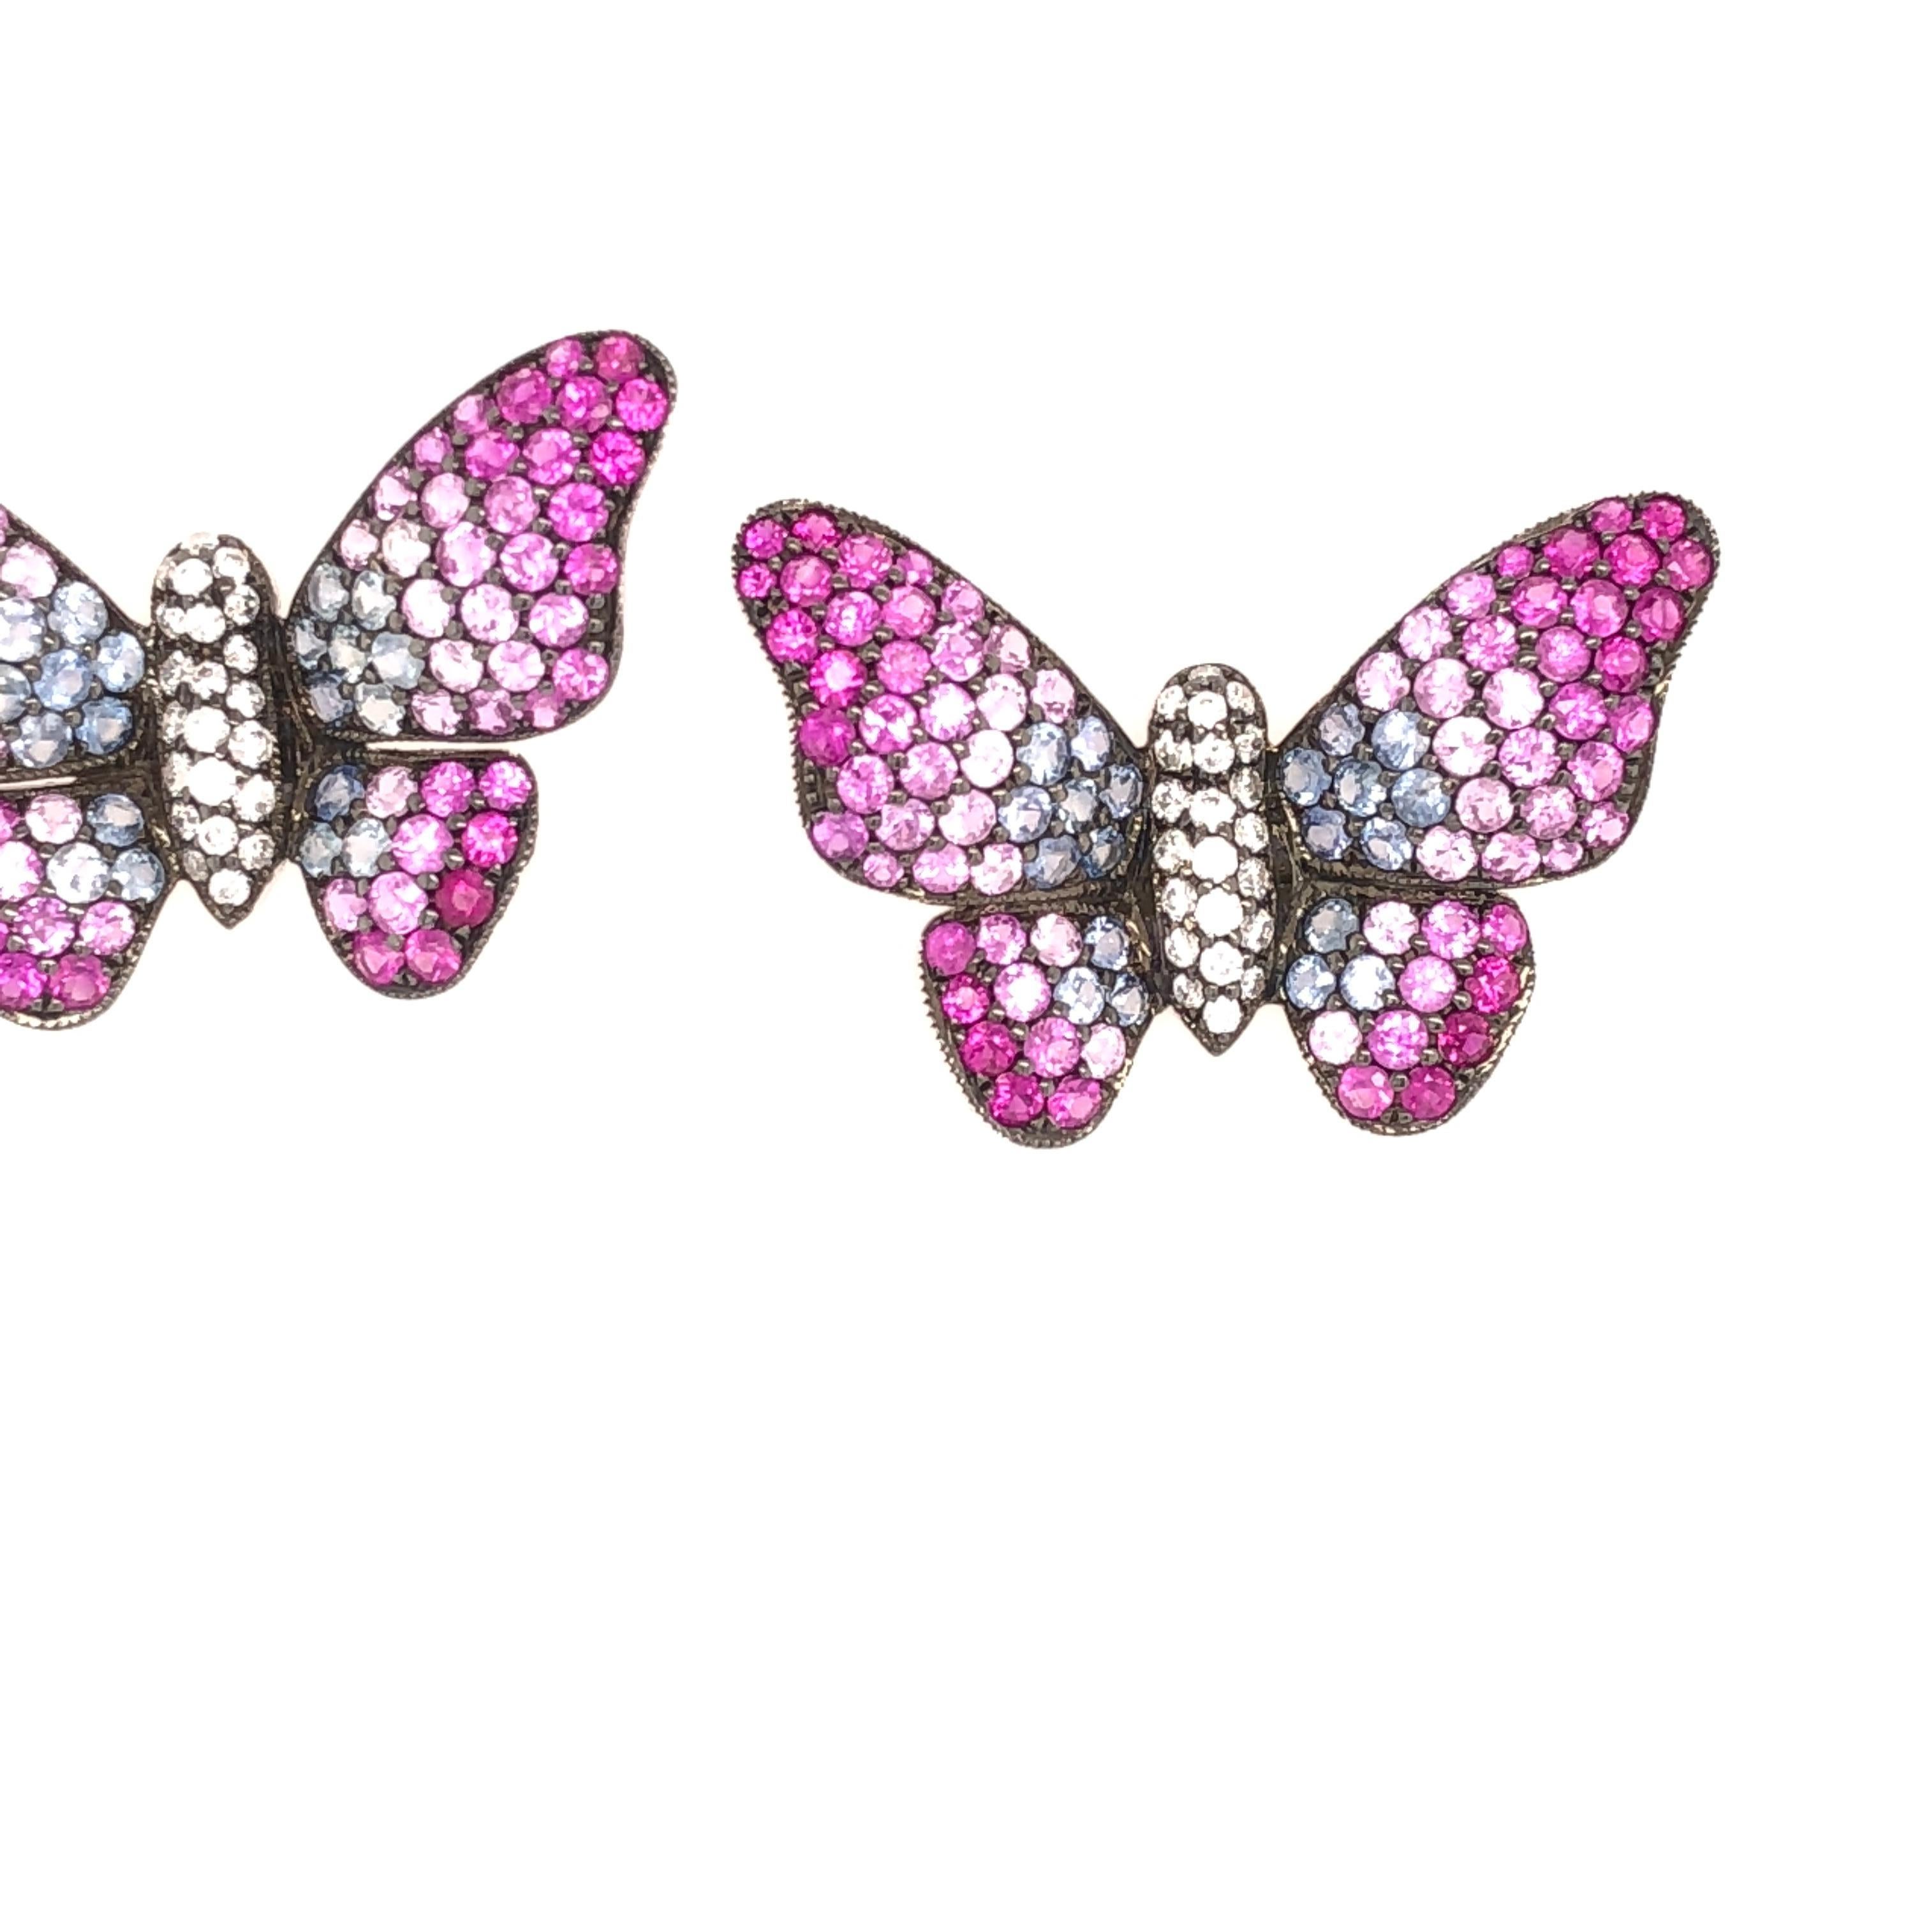 Gradient Collection 

Pink and blue Sapphire gradient with Diamonds butterfly stud earrings set in 18K white gold.

Sapphire: 2.83ct total weight.
Diamonds: 0.23ct total weight.
All diamonds are G-H/SI stones.
Length - is approximately